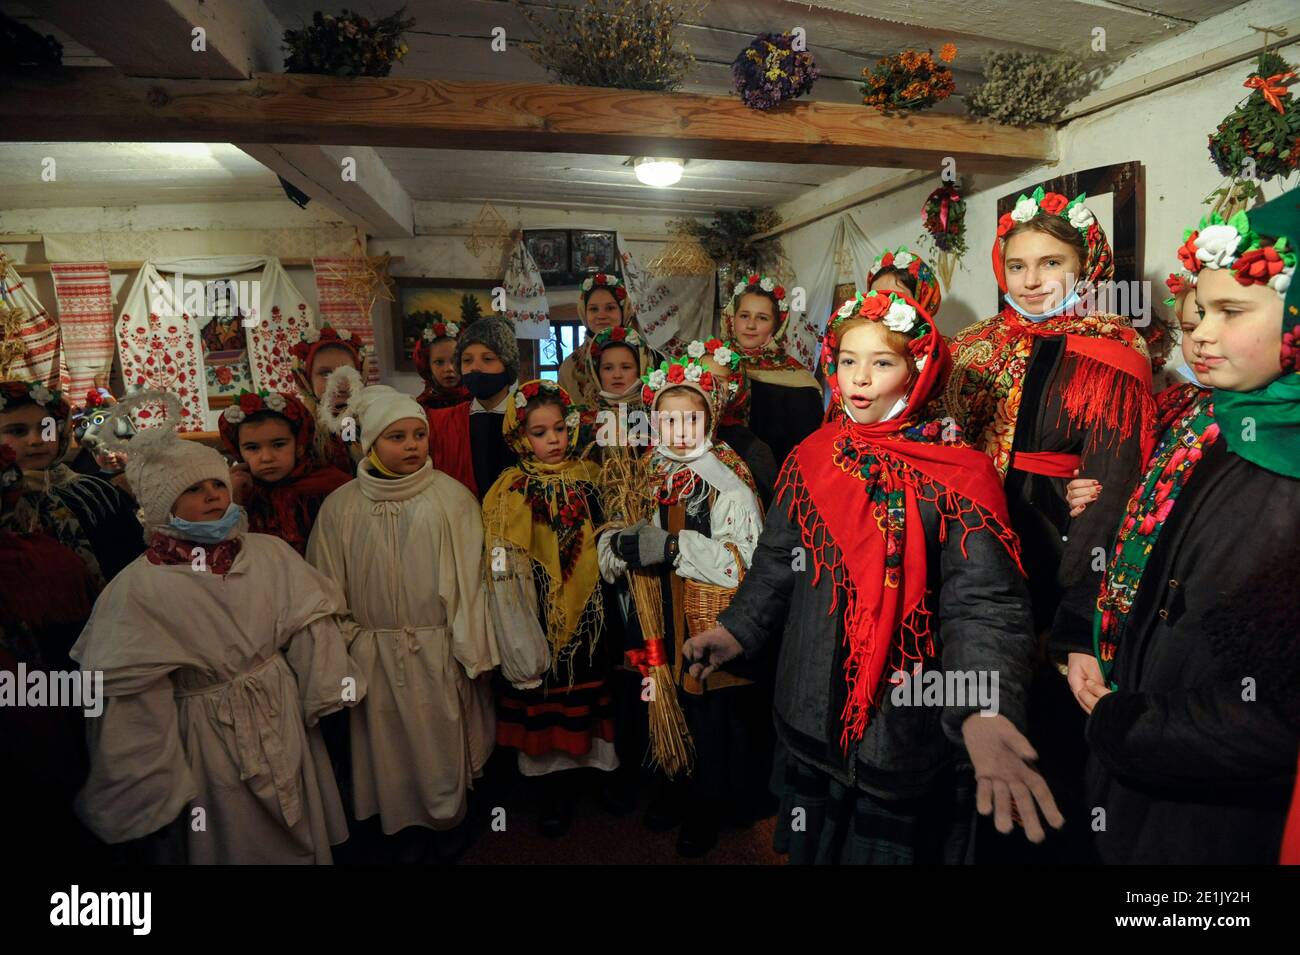 Ukrainian kids dressed in folk costumes singing Christmas songs during the Orthodox Christmas in Pirogovo village celebrated according to the old Julian calendar. Stock Photo